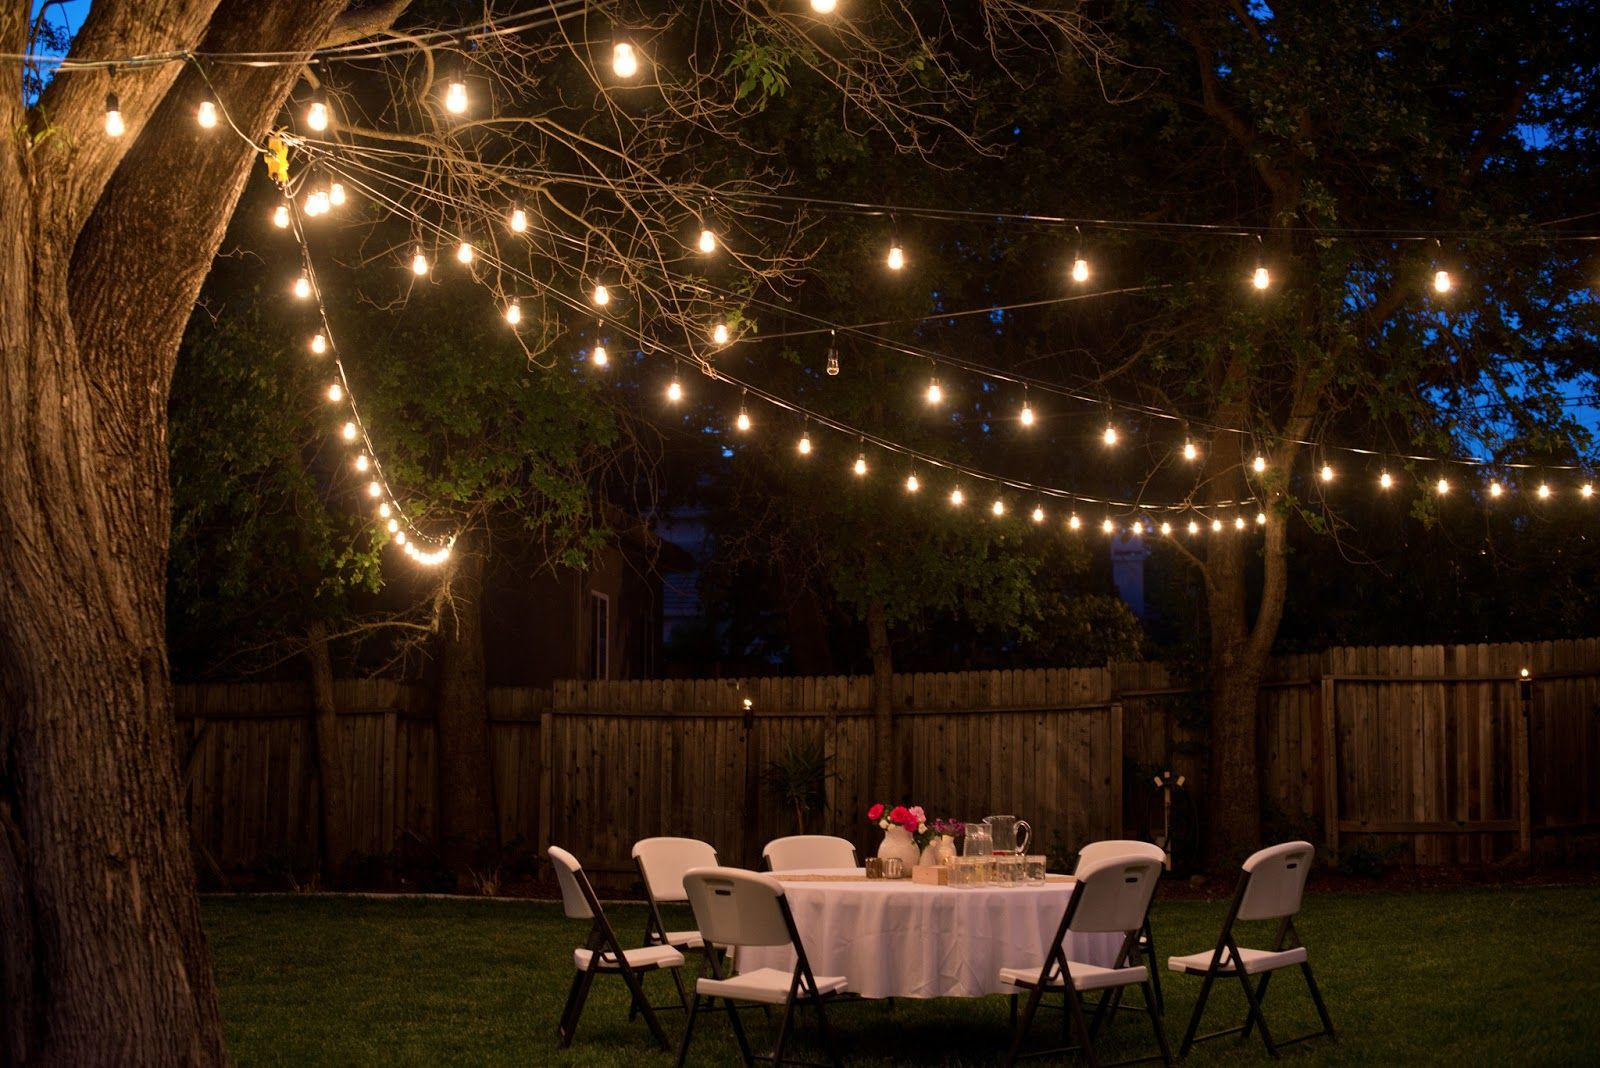 Backyard Lighting Ideas For A Party
 5 Life Hacks To Make Your Backyard A Wonderland The Body